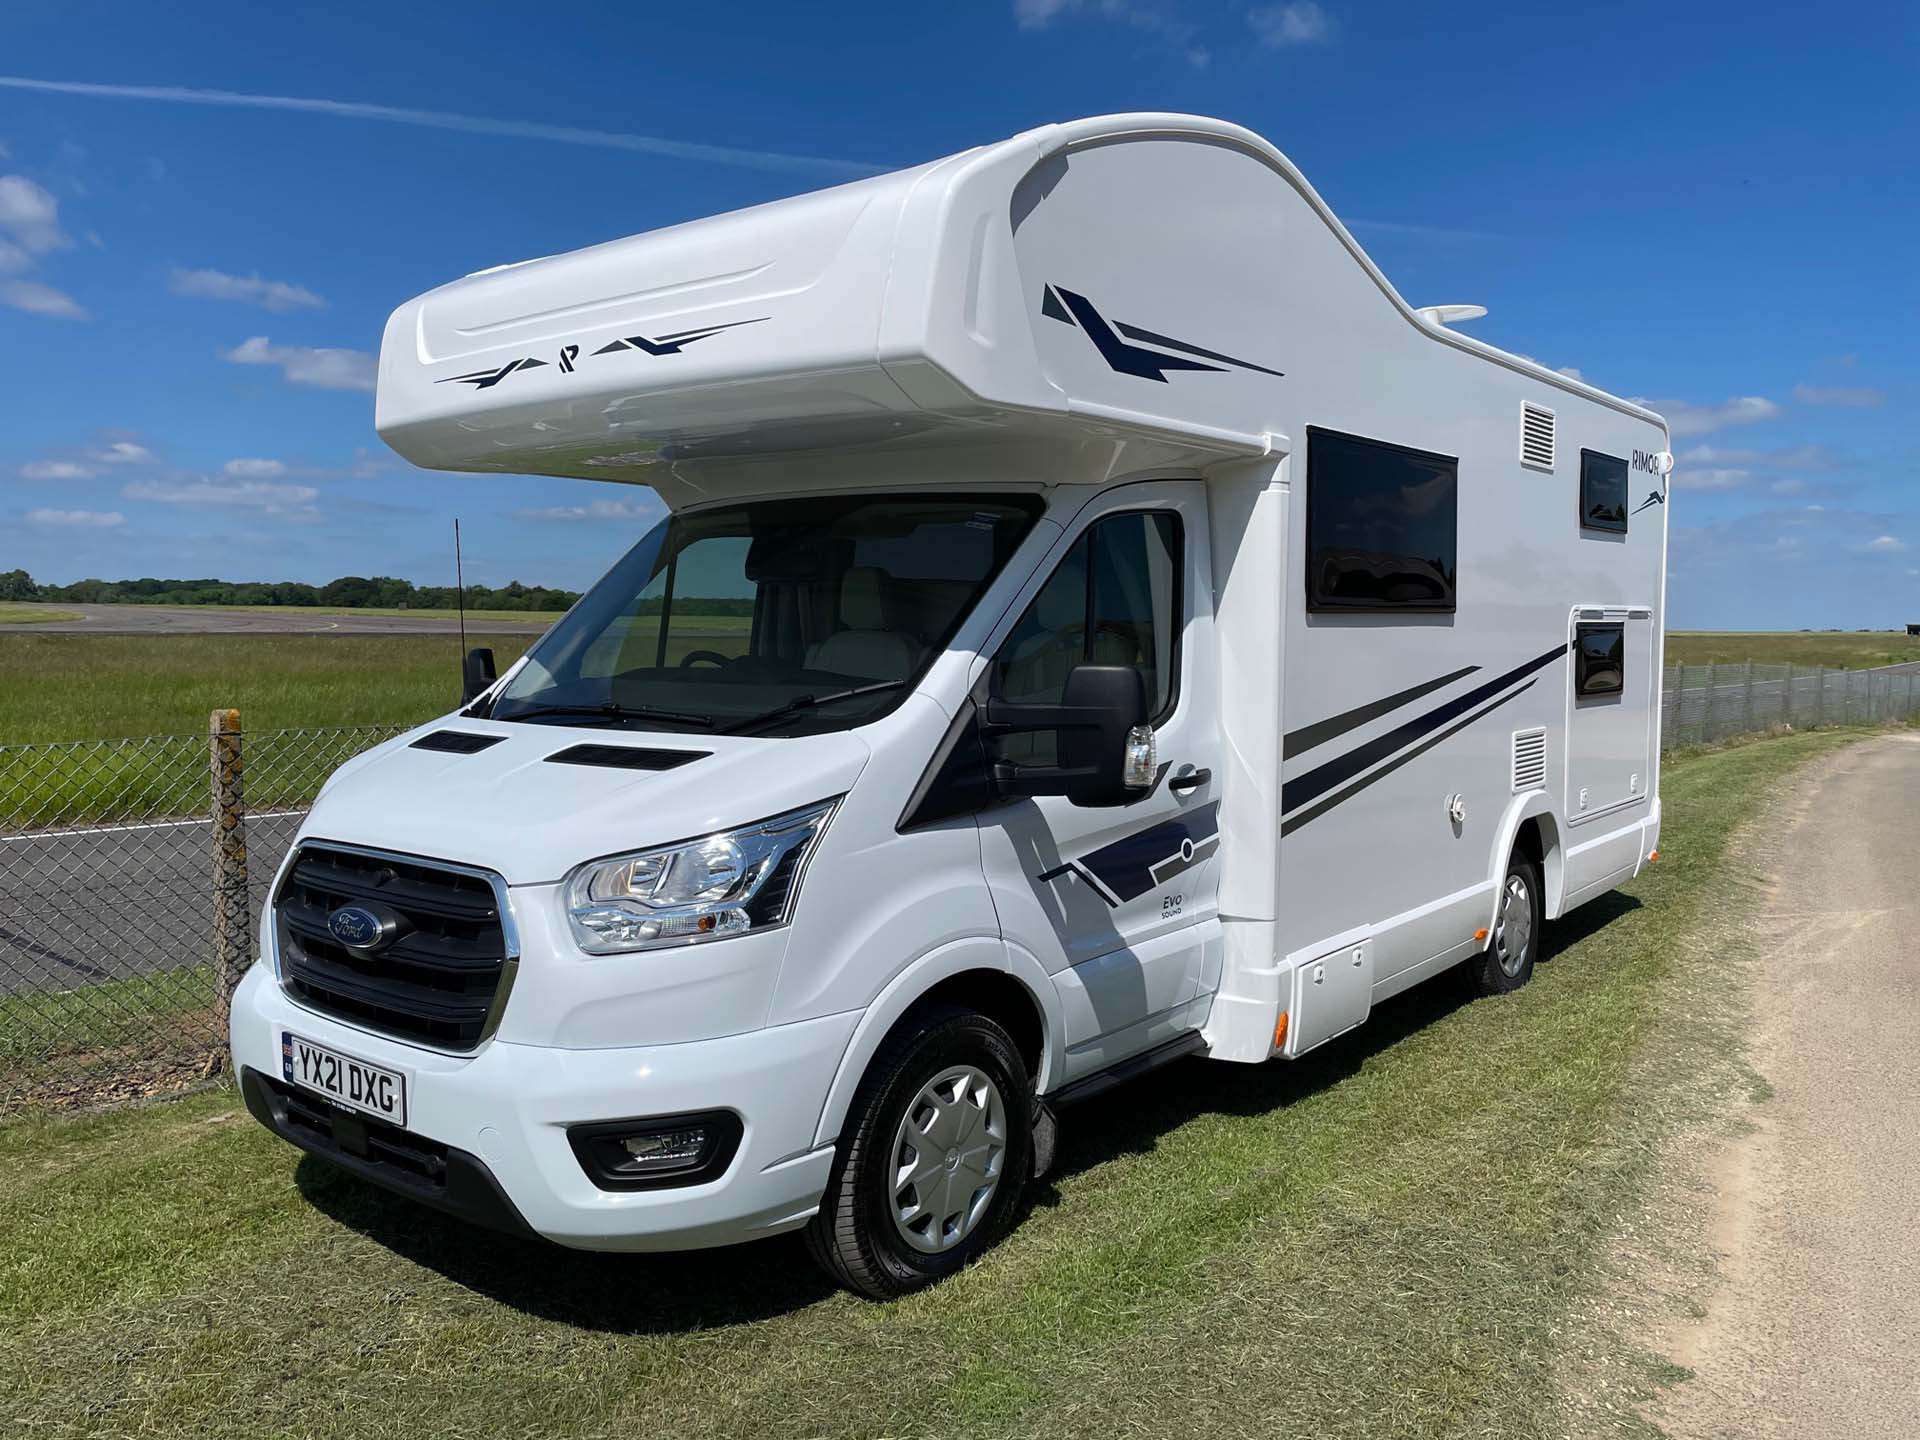 A Rimor Motorhome called Rimor-Evo-Sound and for hire in Peterborough, England